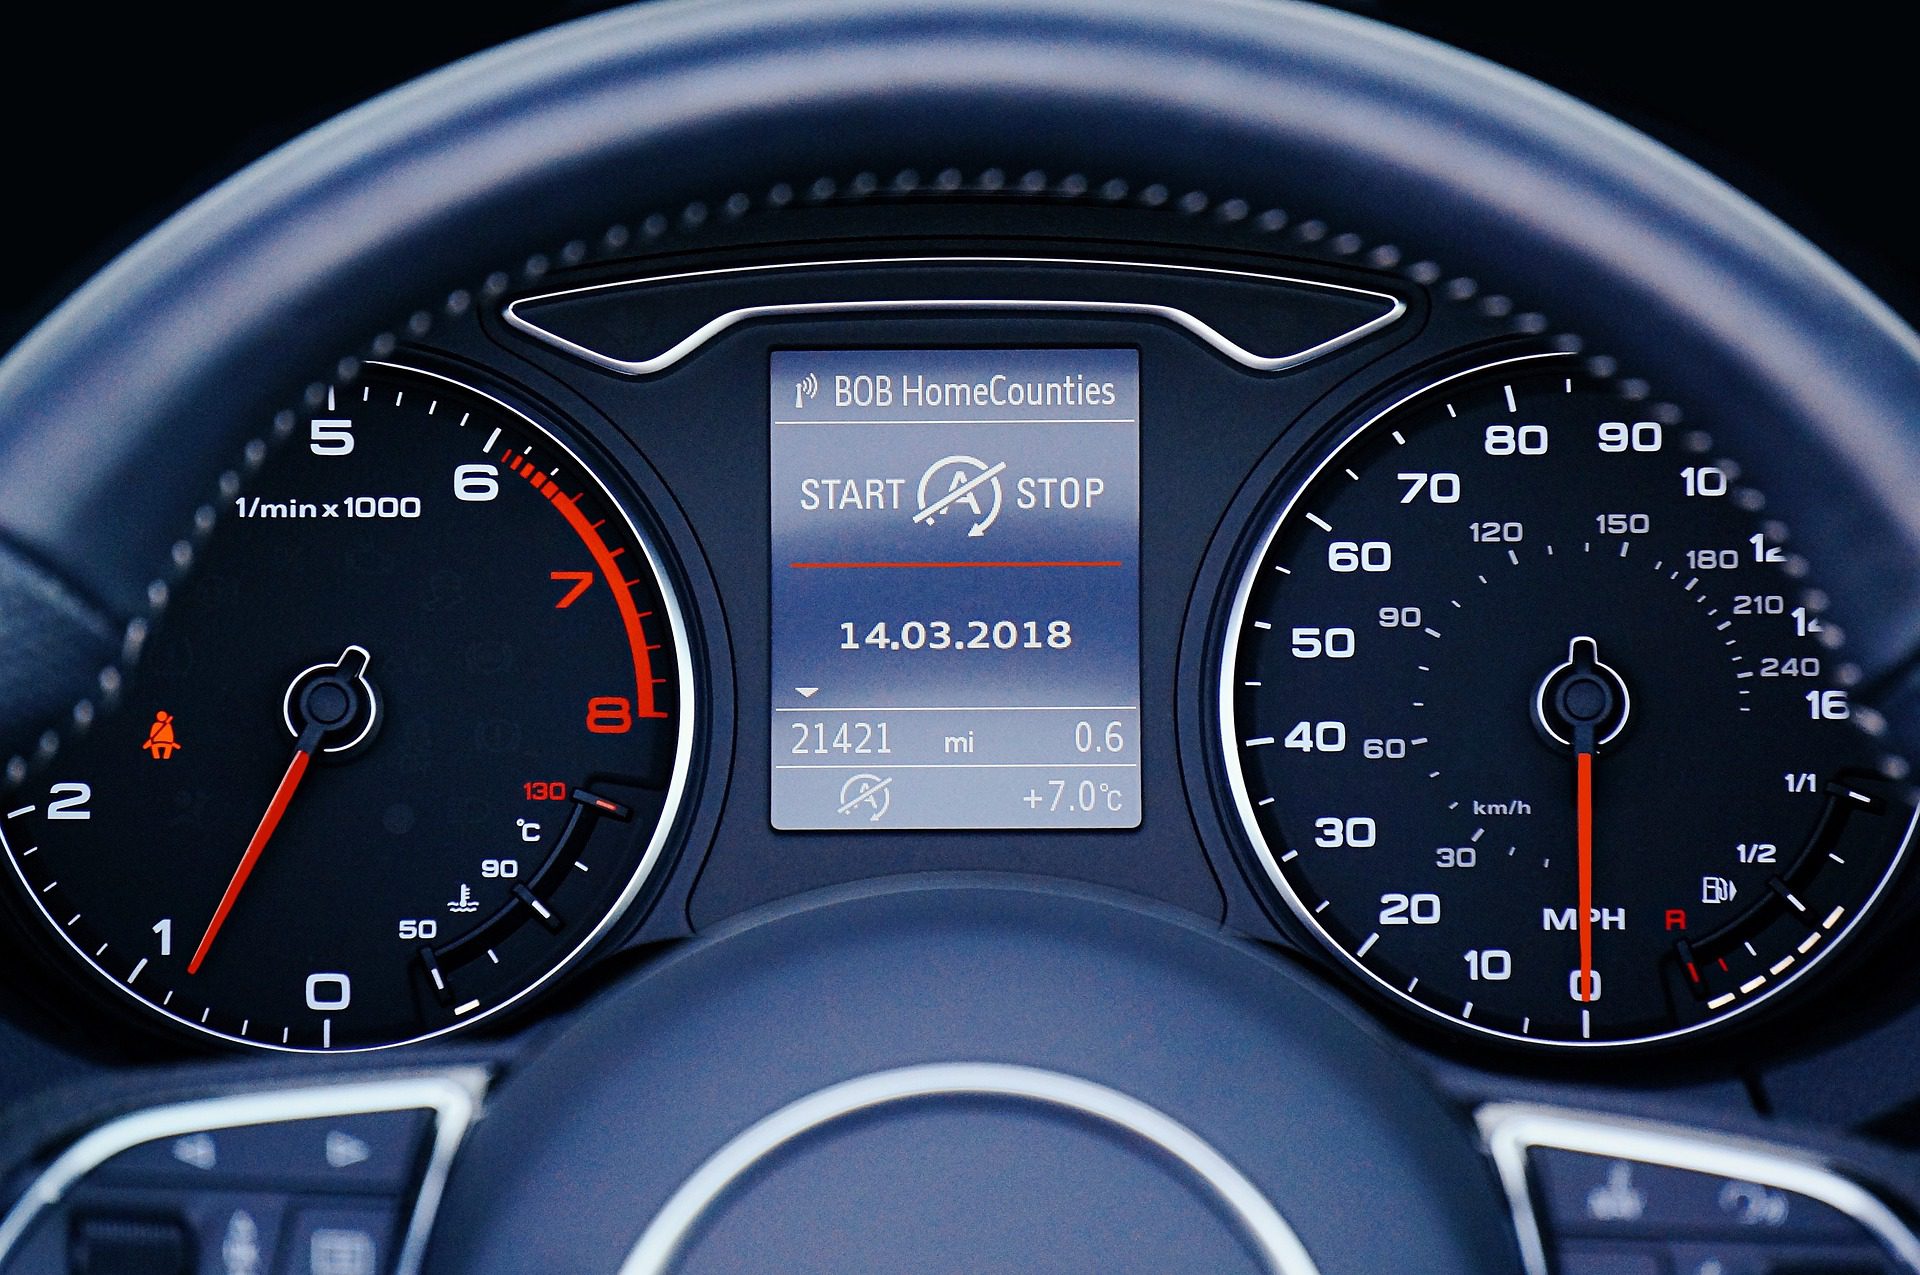 an odometer in a car, showing the mileage of the vehicle